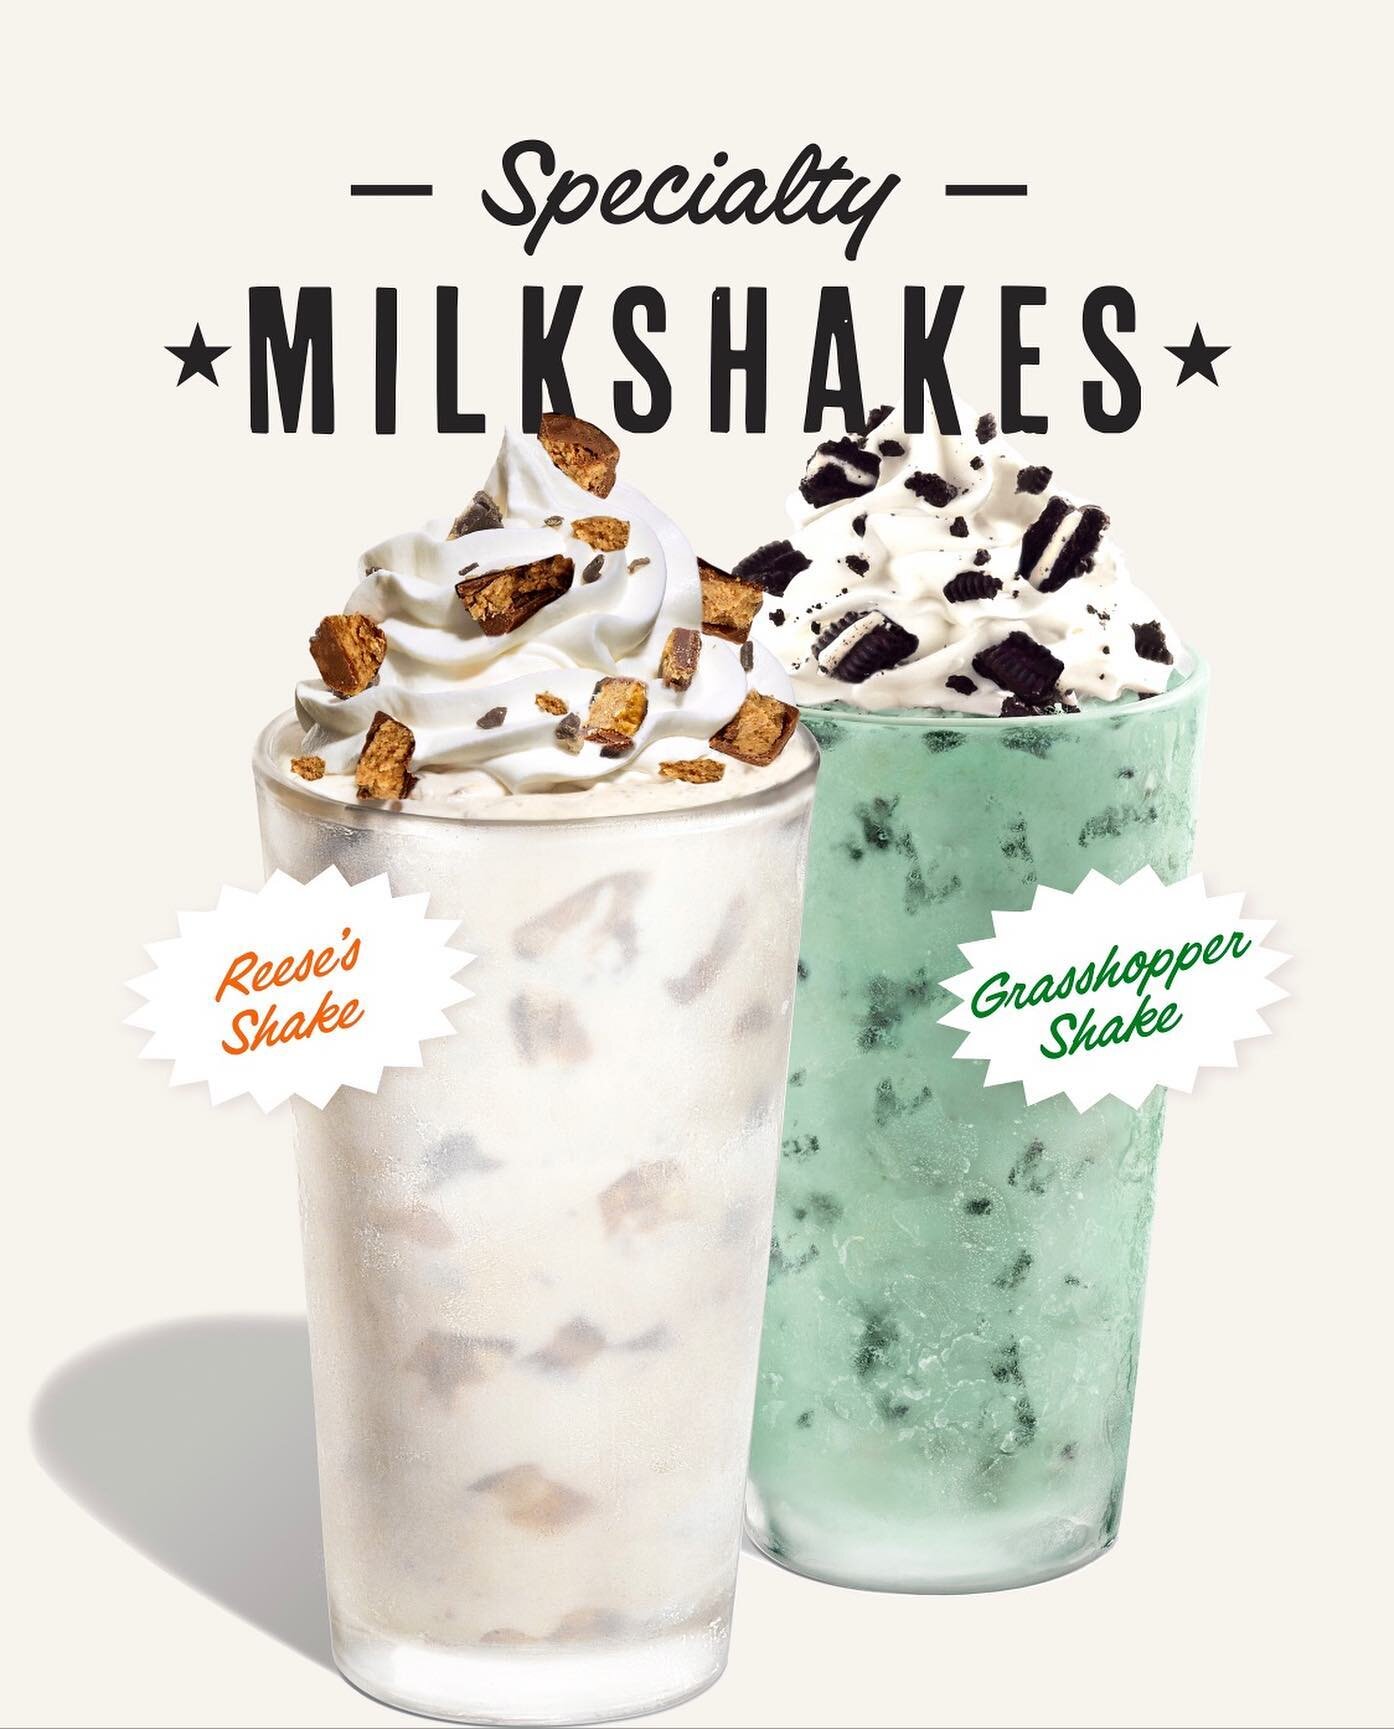 Next month, we will begin making a specialty shake of the month! Some months we will highlight our owners&rsquo; favorite flavor and other months will be unique combinations based on holidays or the time of year. Before we finalize our lineup, we wan